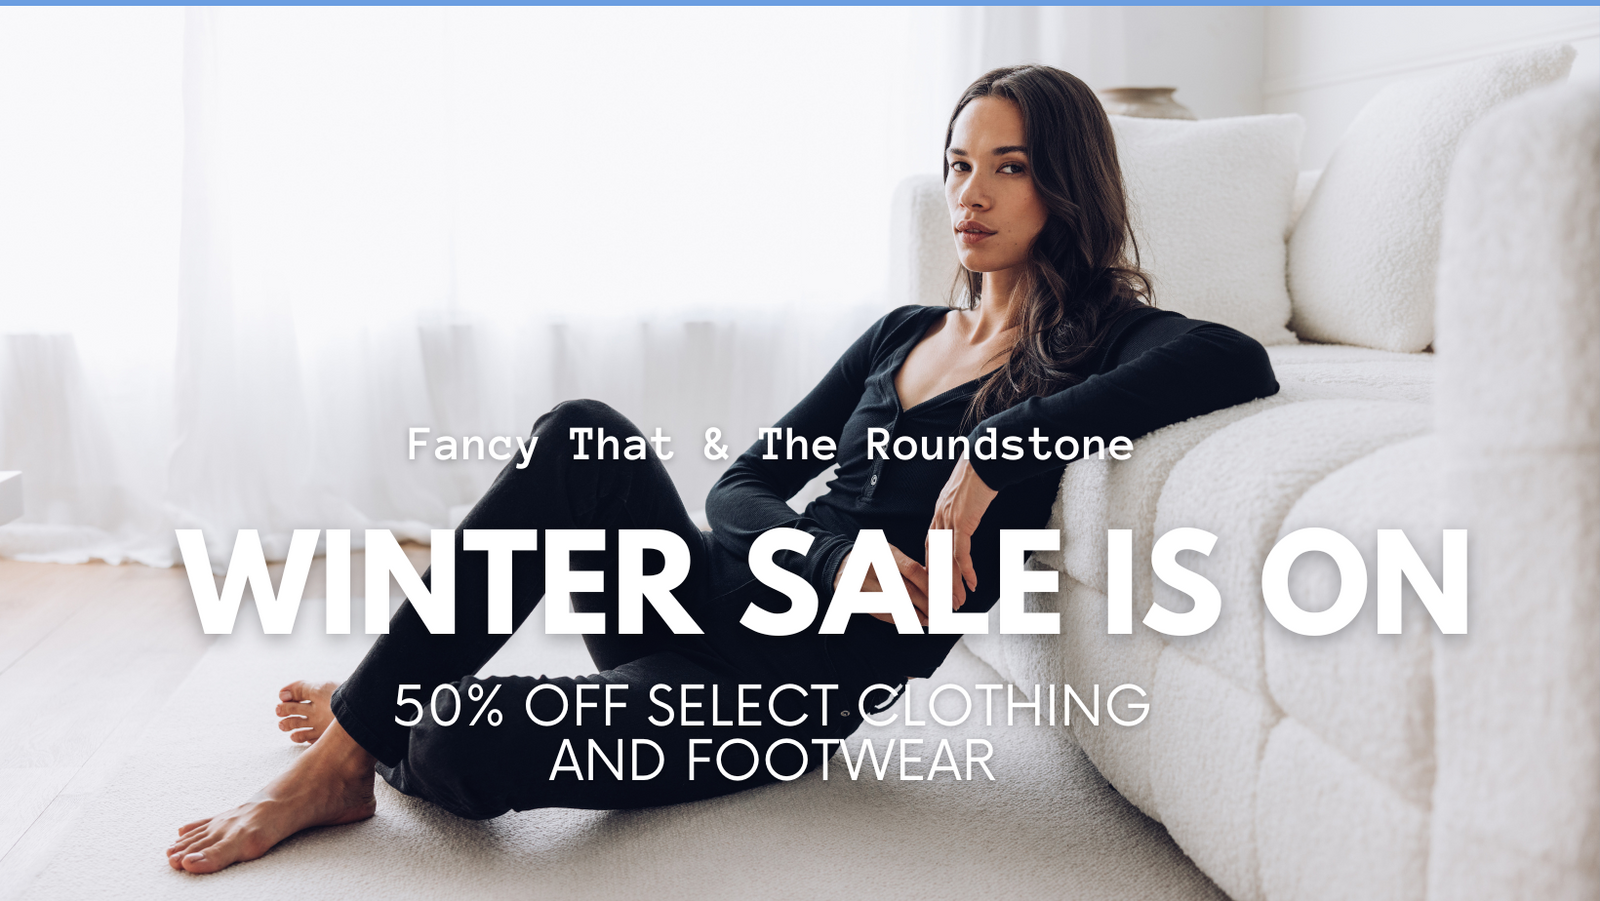 Fancy That & The Roundstone - Personal Boutique